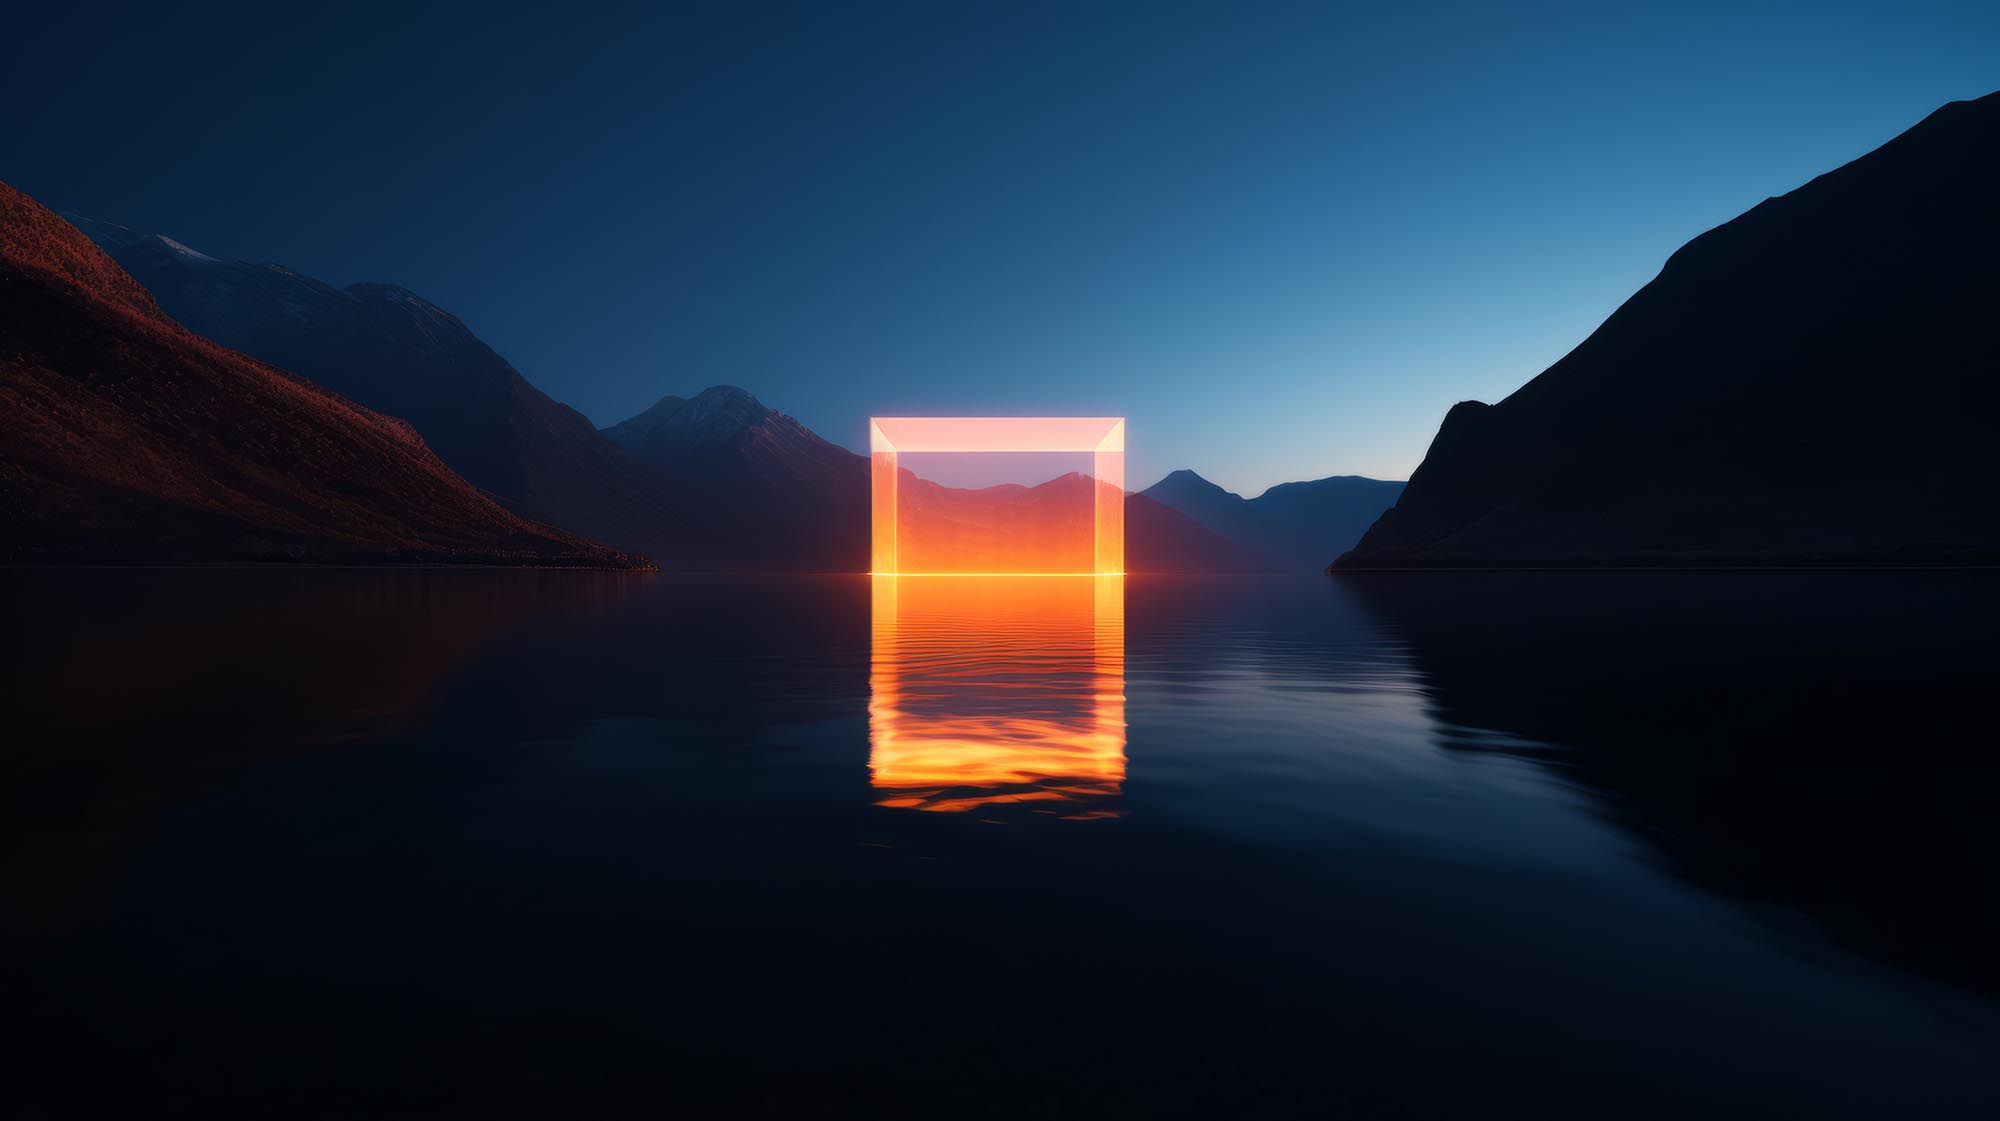 Neon square hovering over the middle of a lake with mountain in the back in a minimalistic setting